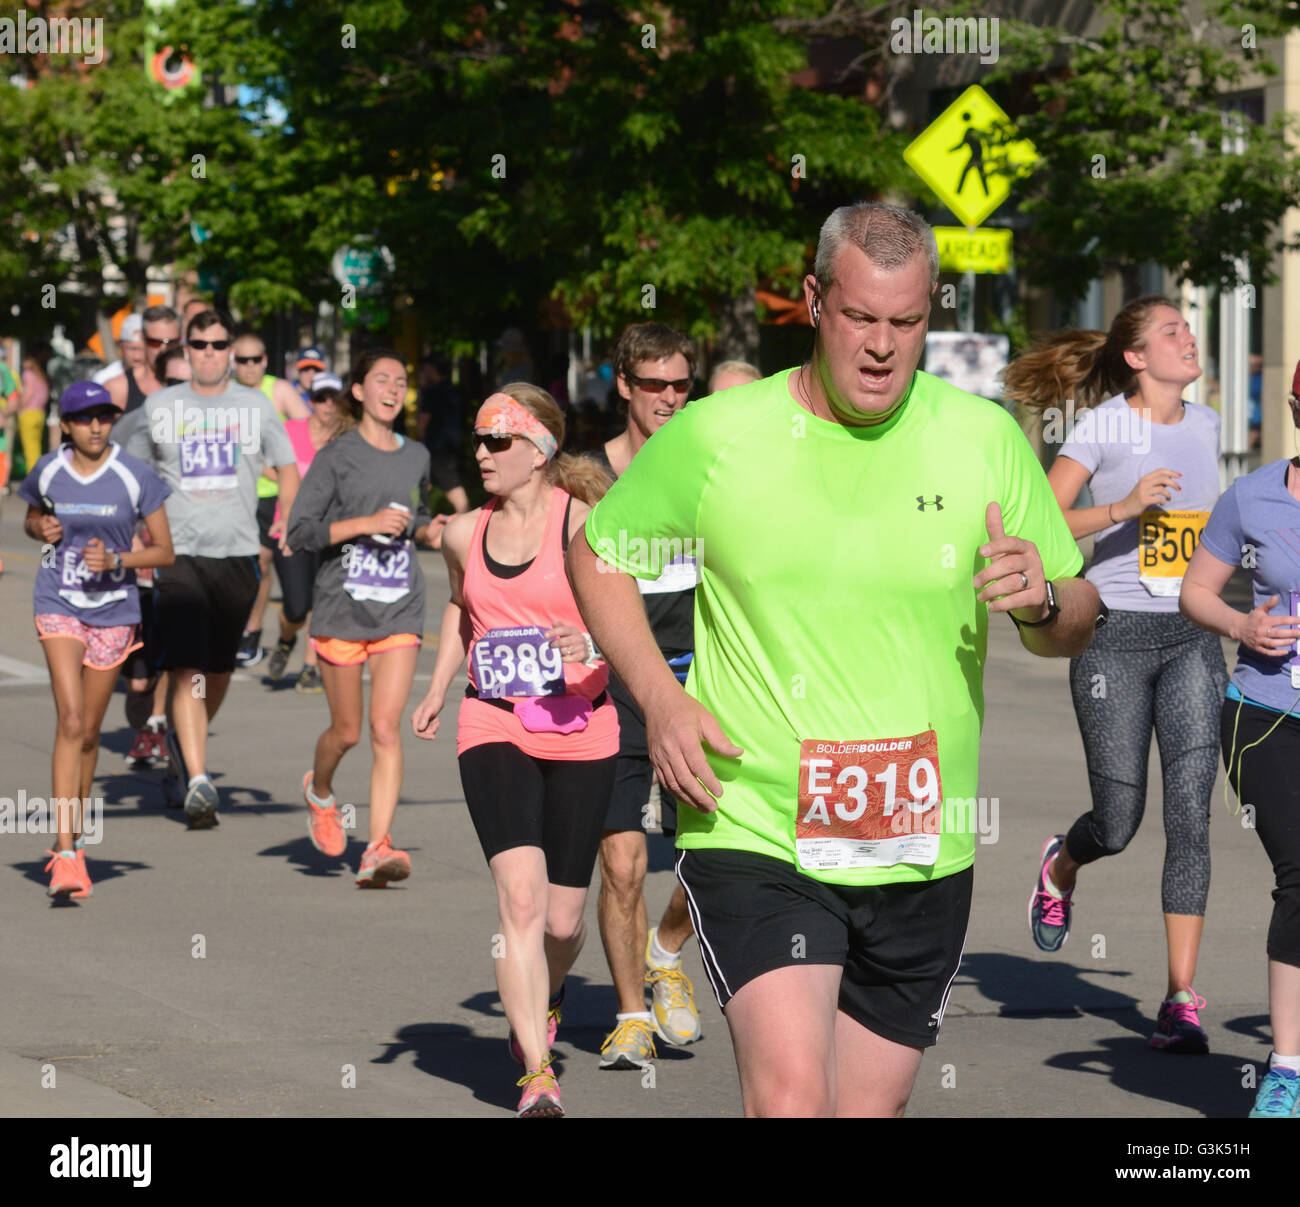 Runners and walkers participate in the 2016 Bolder Boulder 10K. More than 50,000 participate each year. Stock Photo